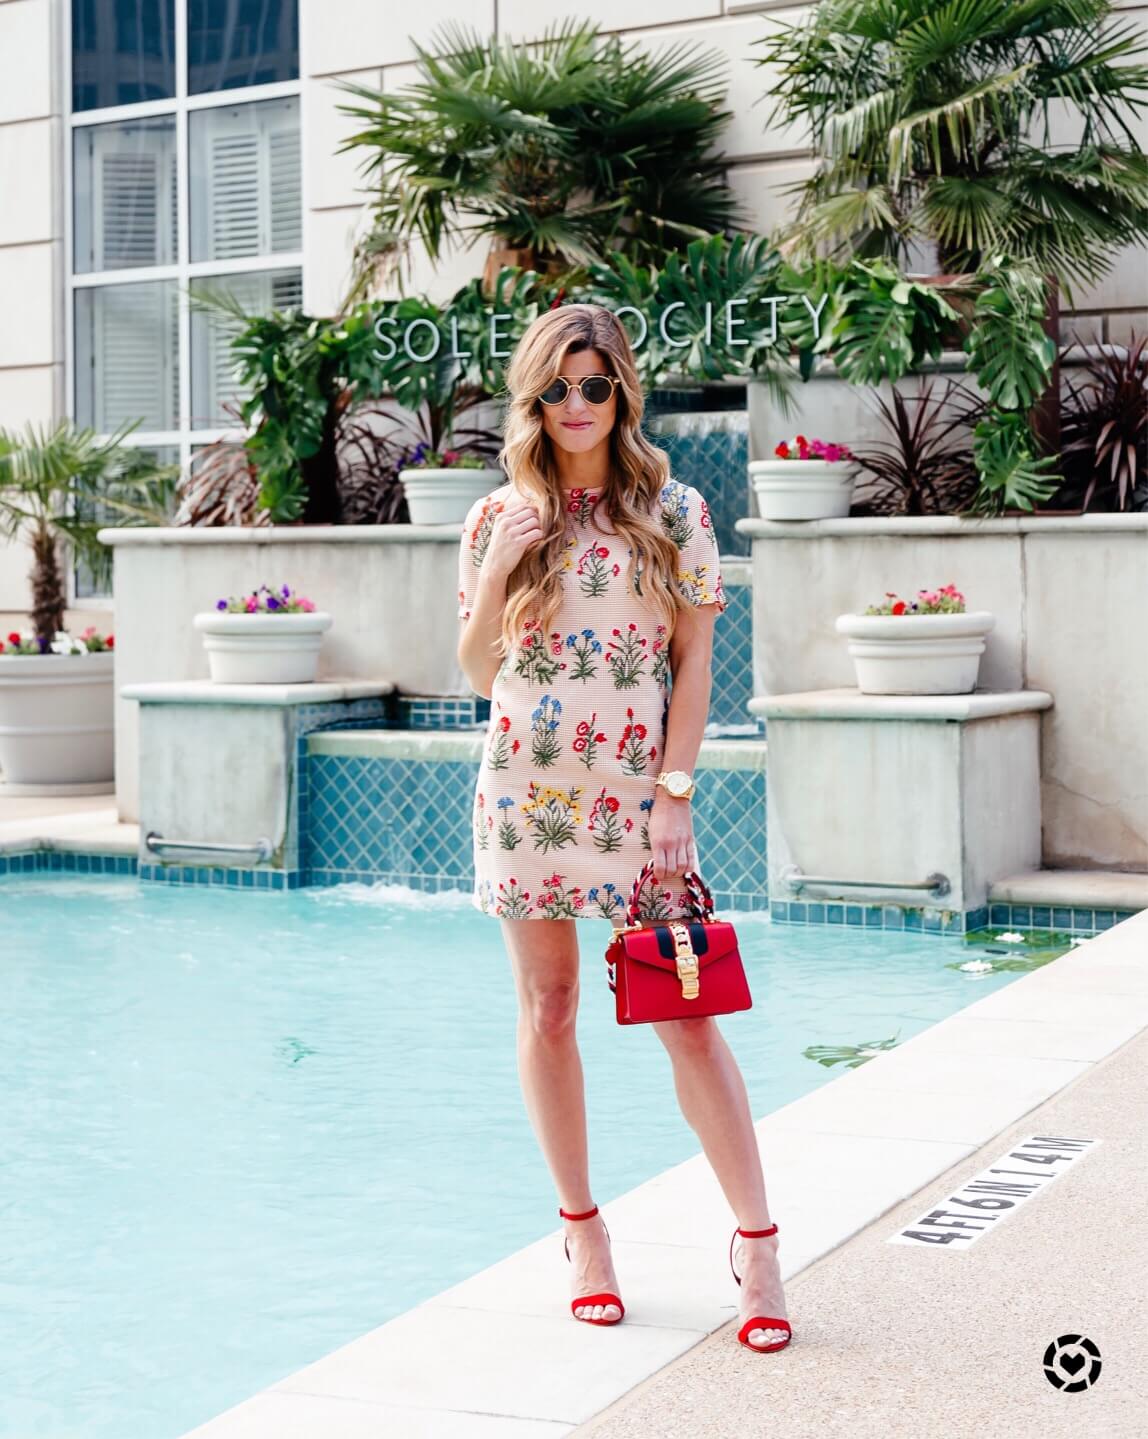 Brighton Keller at Reward Style night 1 pool party, wearing embroidered dress